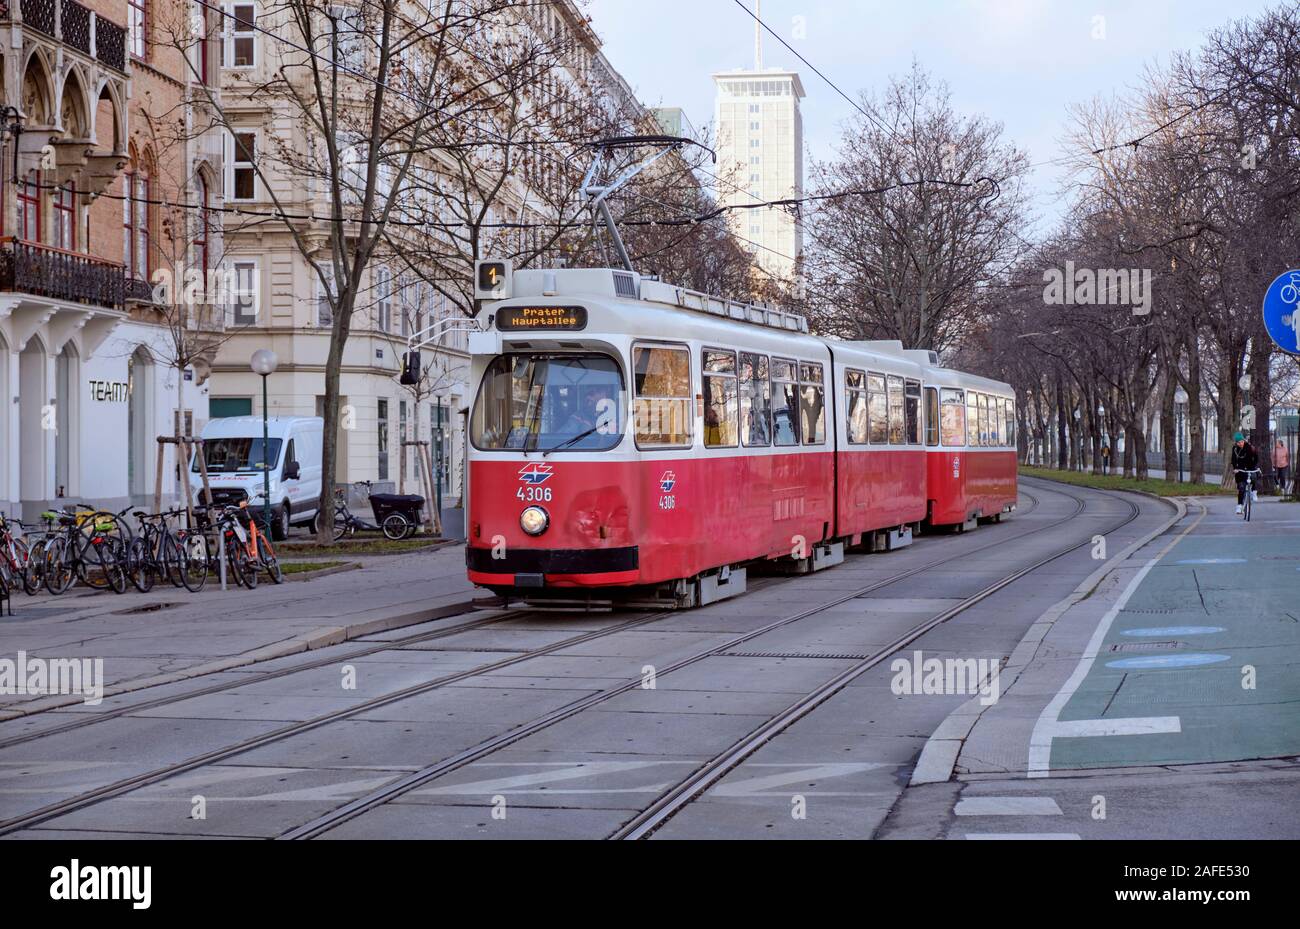 E2 type Vienna Tram riding on tracks bordered by cycling lane, and winter leafless trees Stock Photo